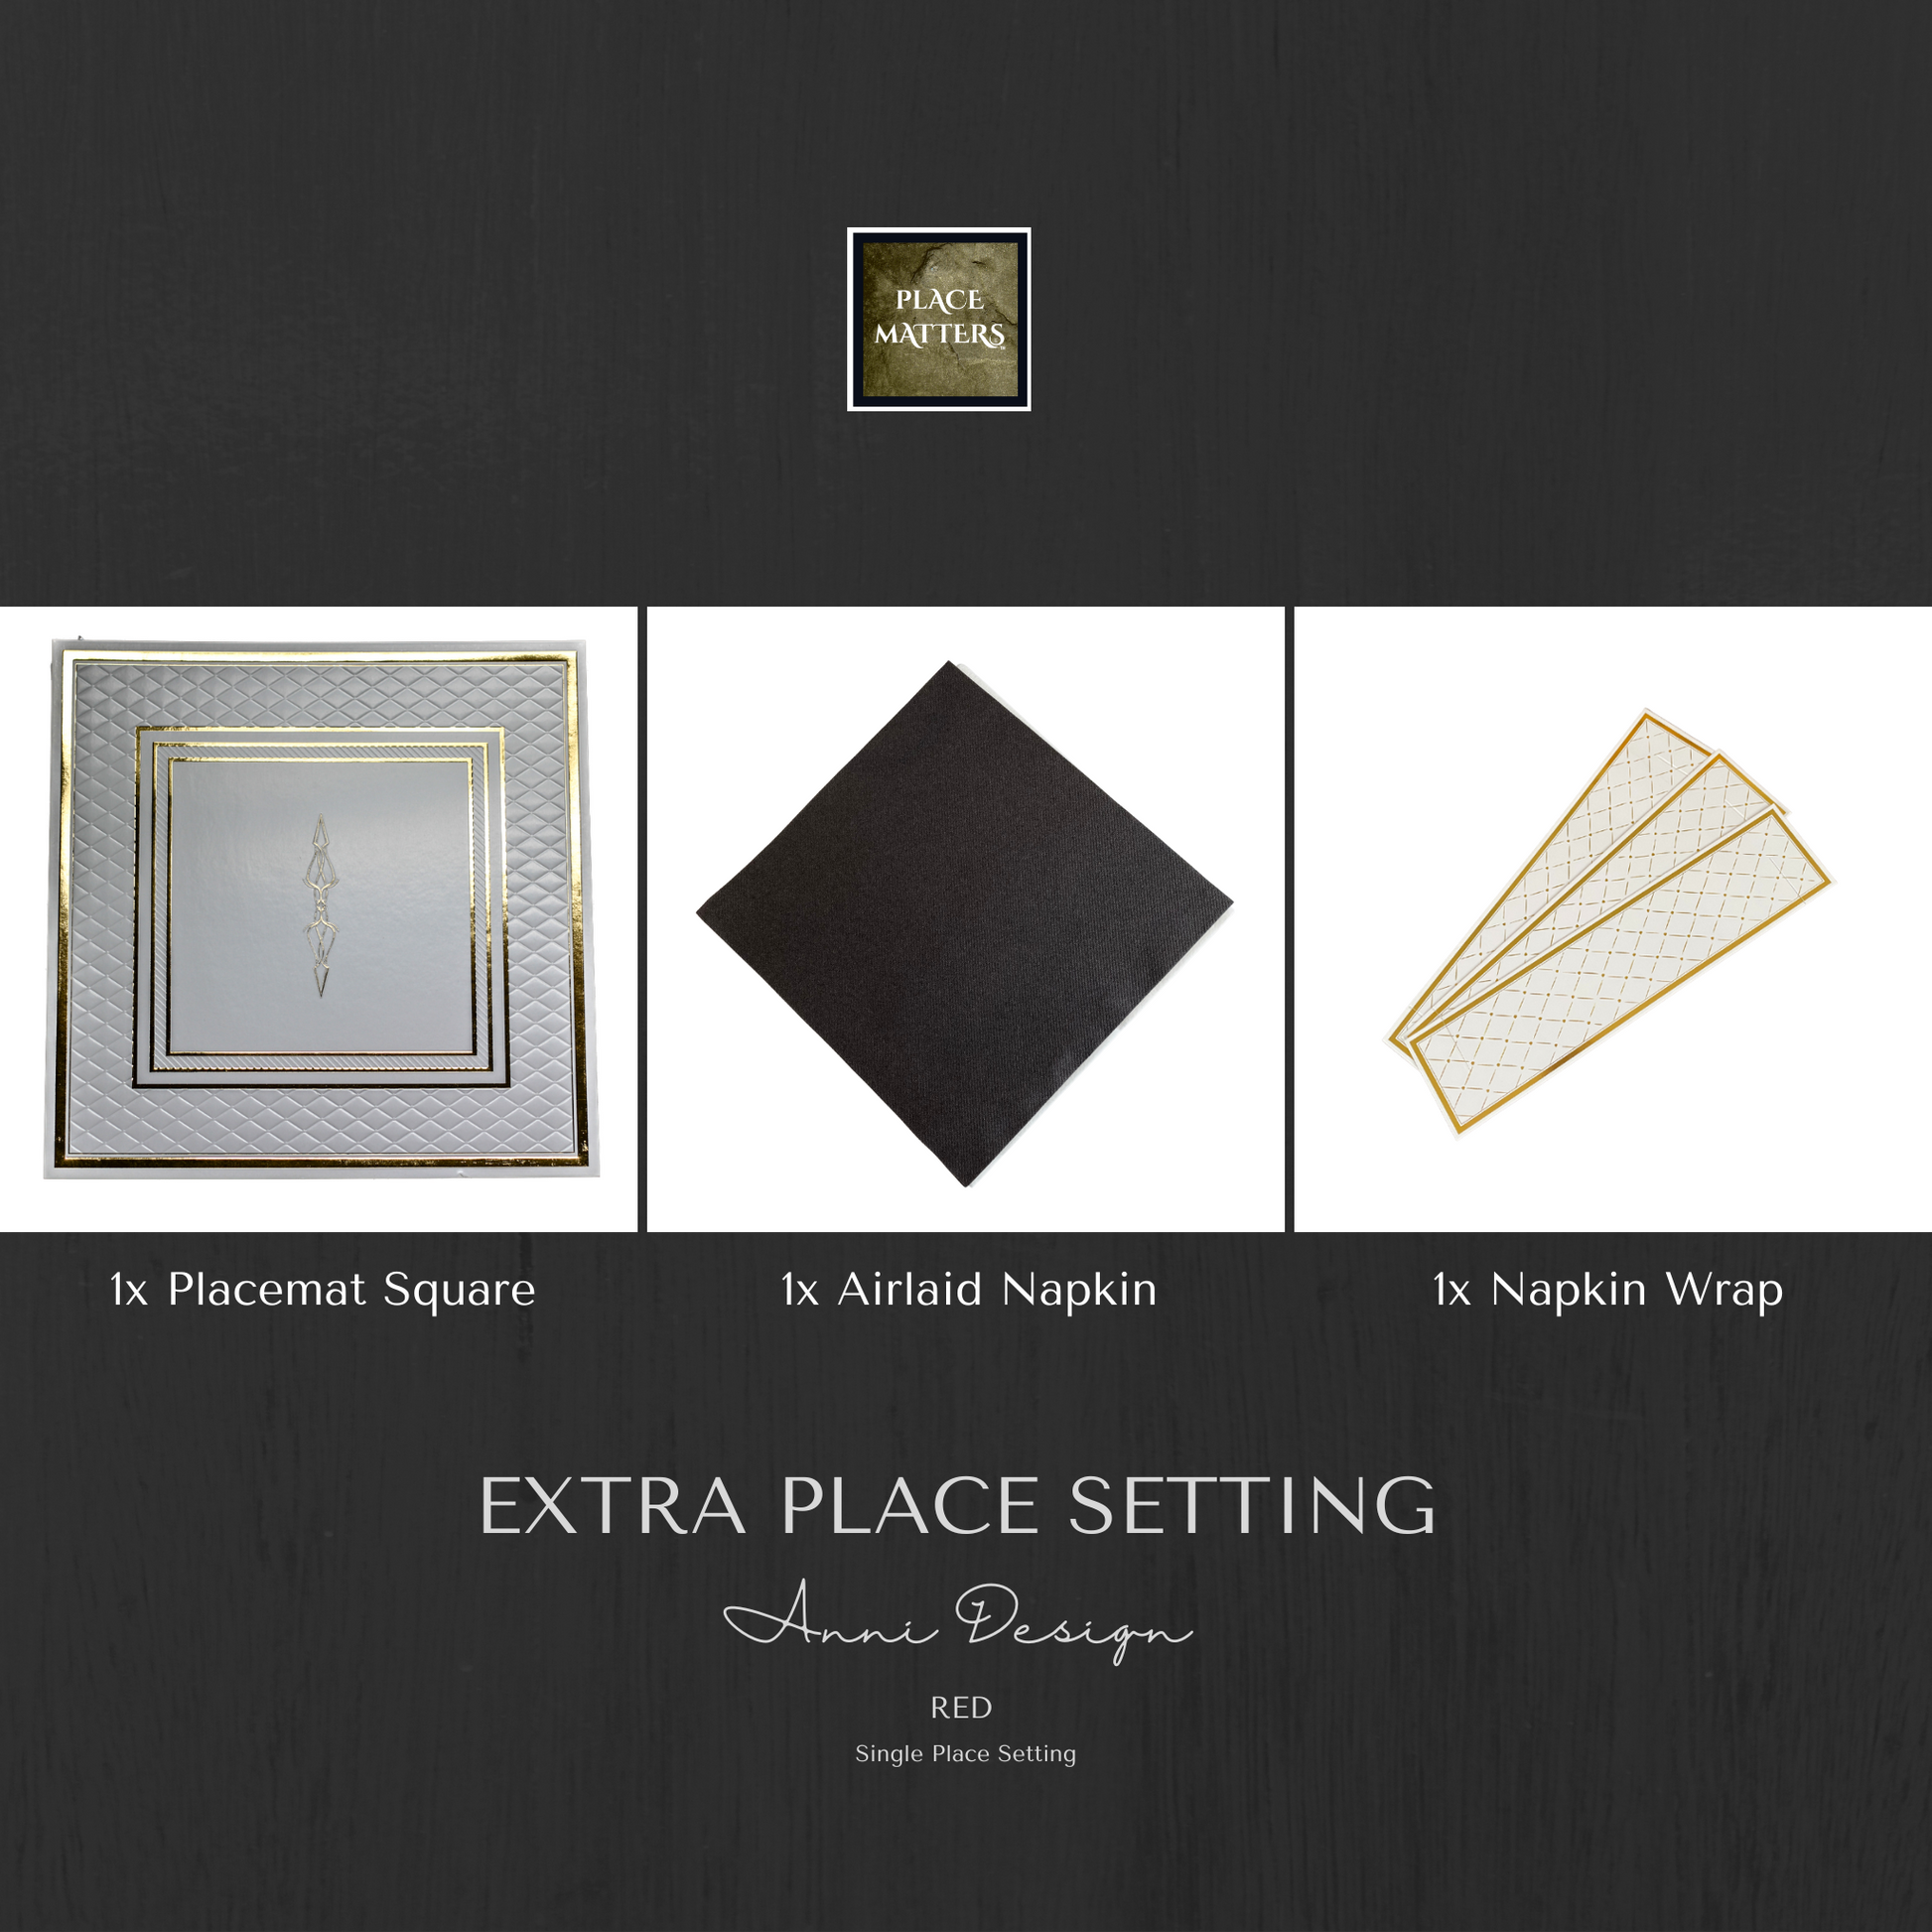 Single Place Setting (Anni Design) Gold - Place Matters